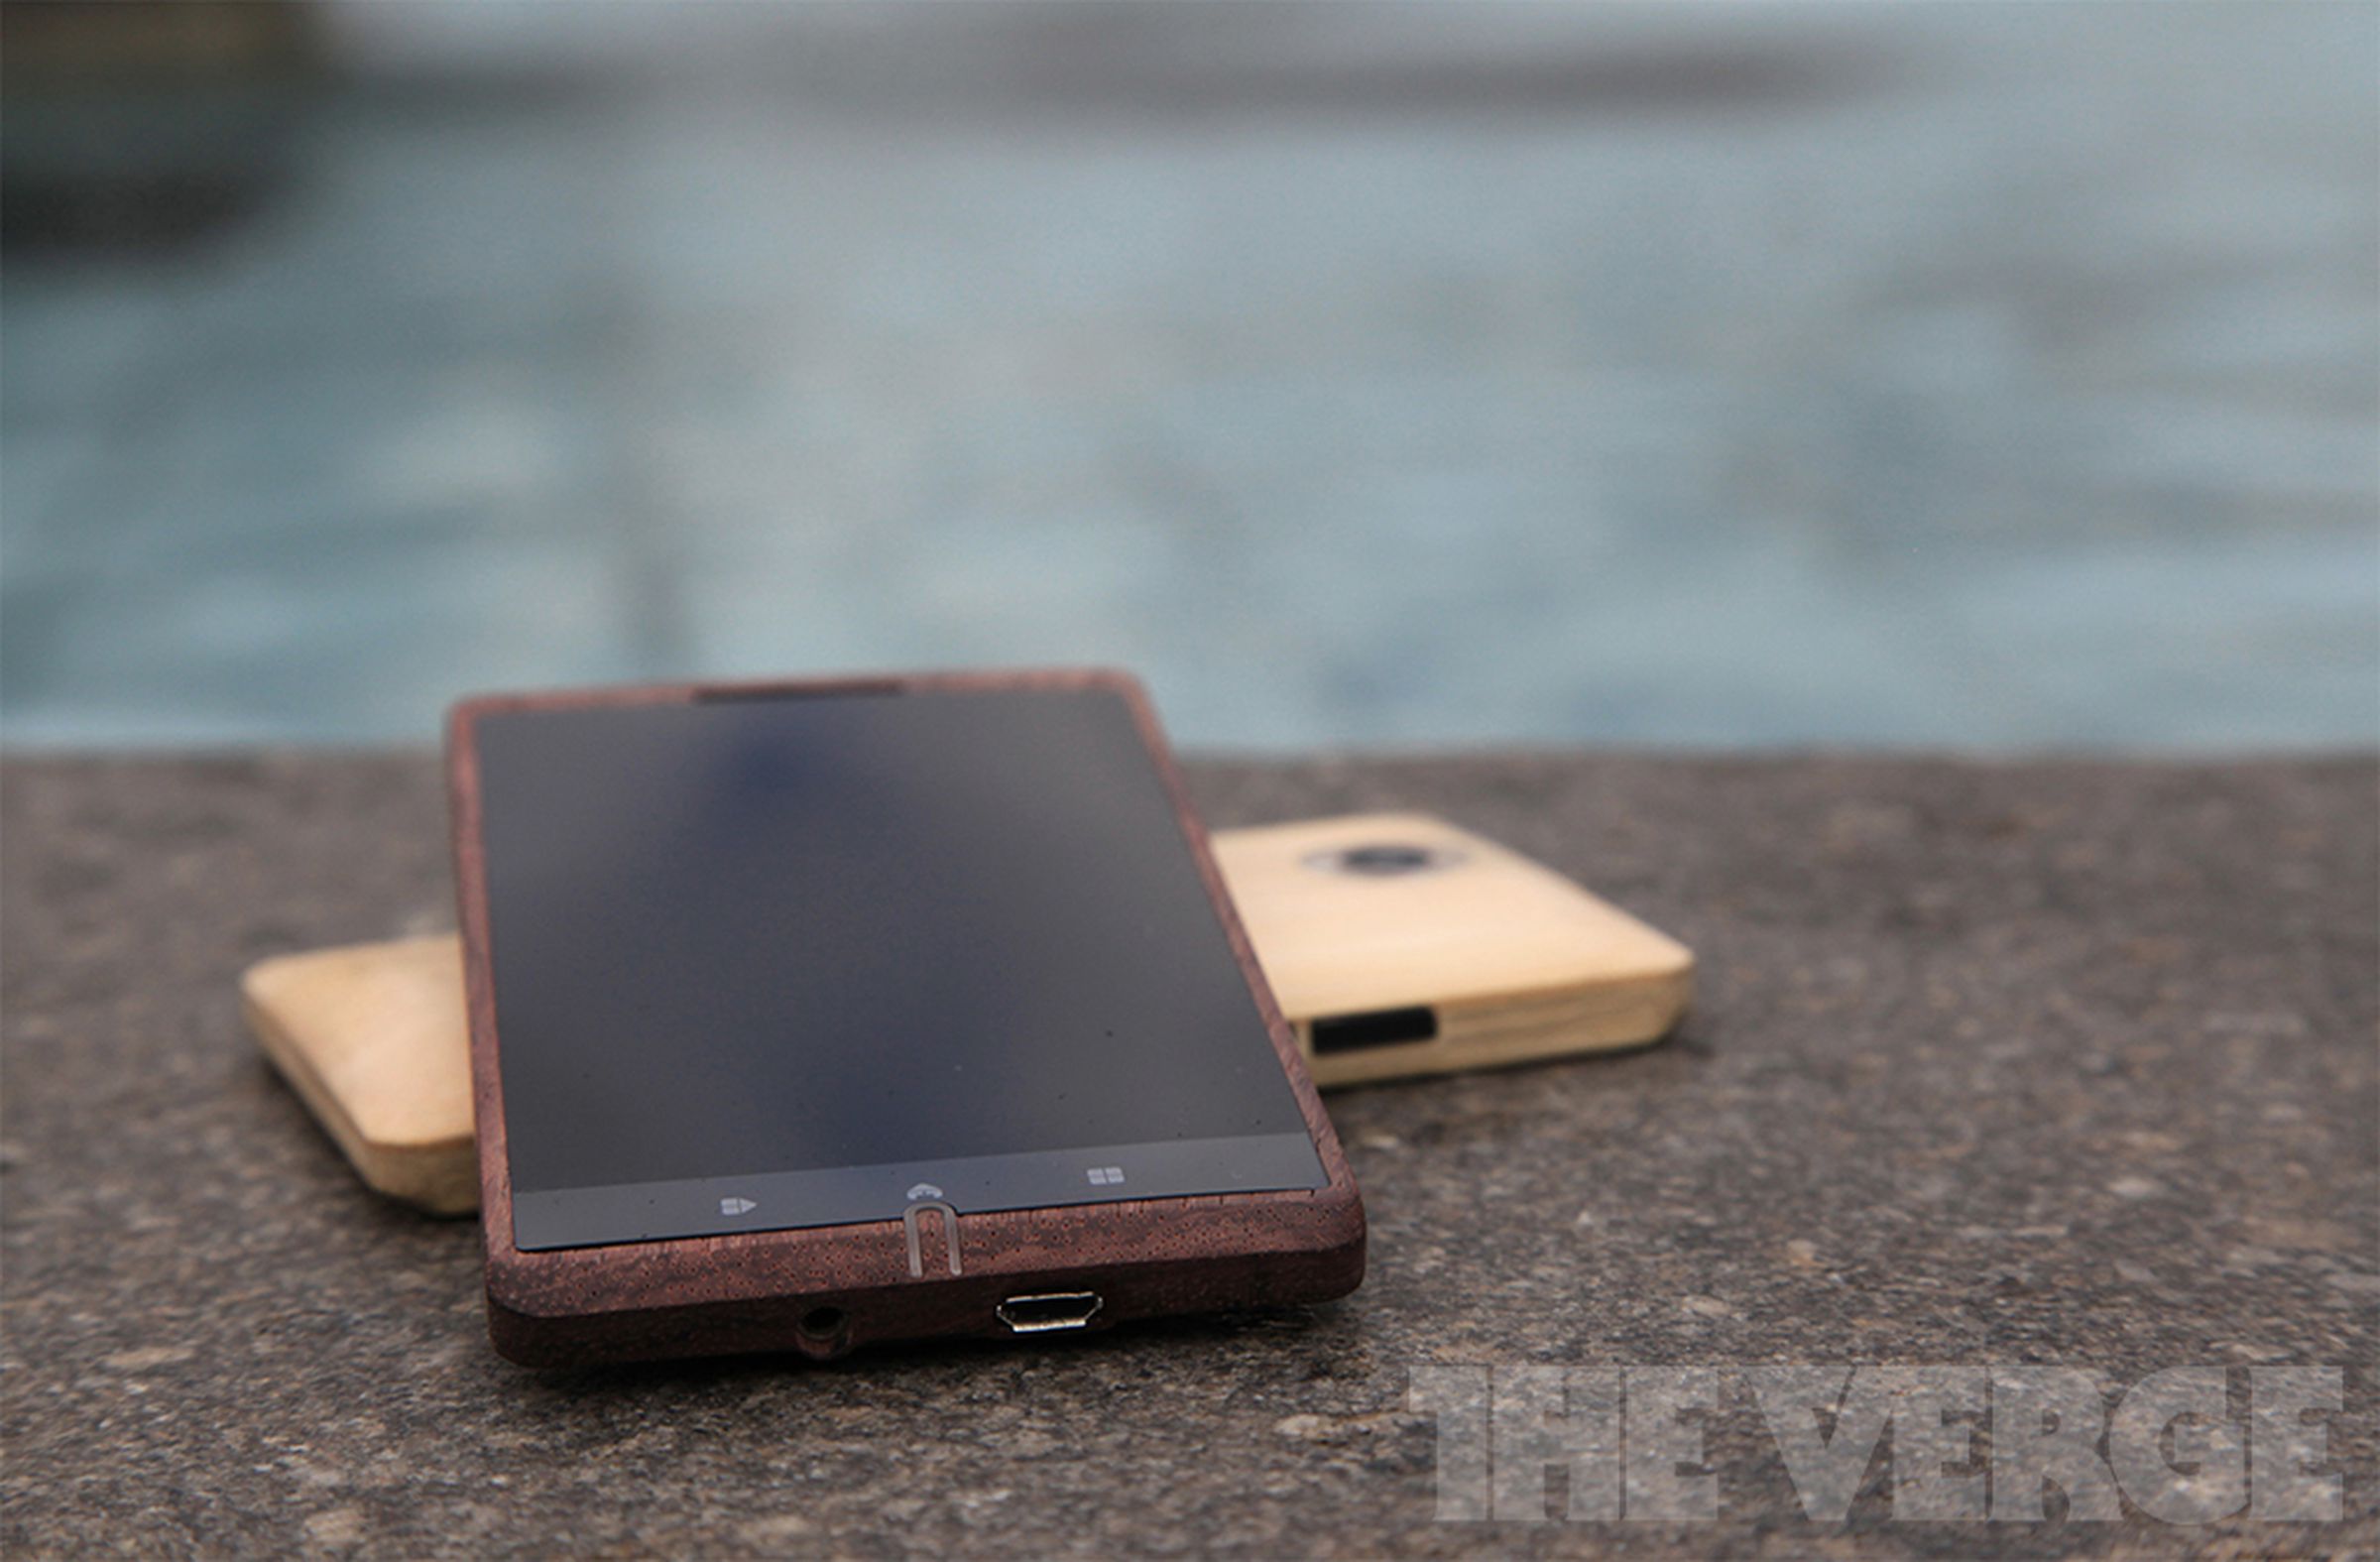 ADzero bamboo and rosewood prototypes hands-on images